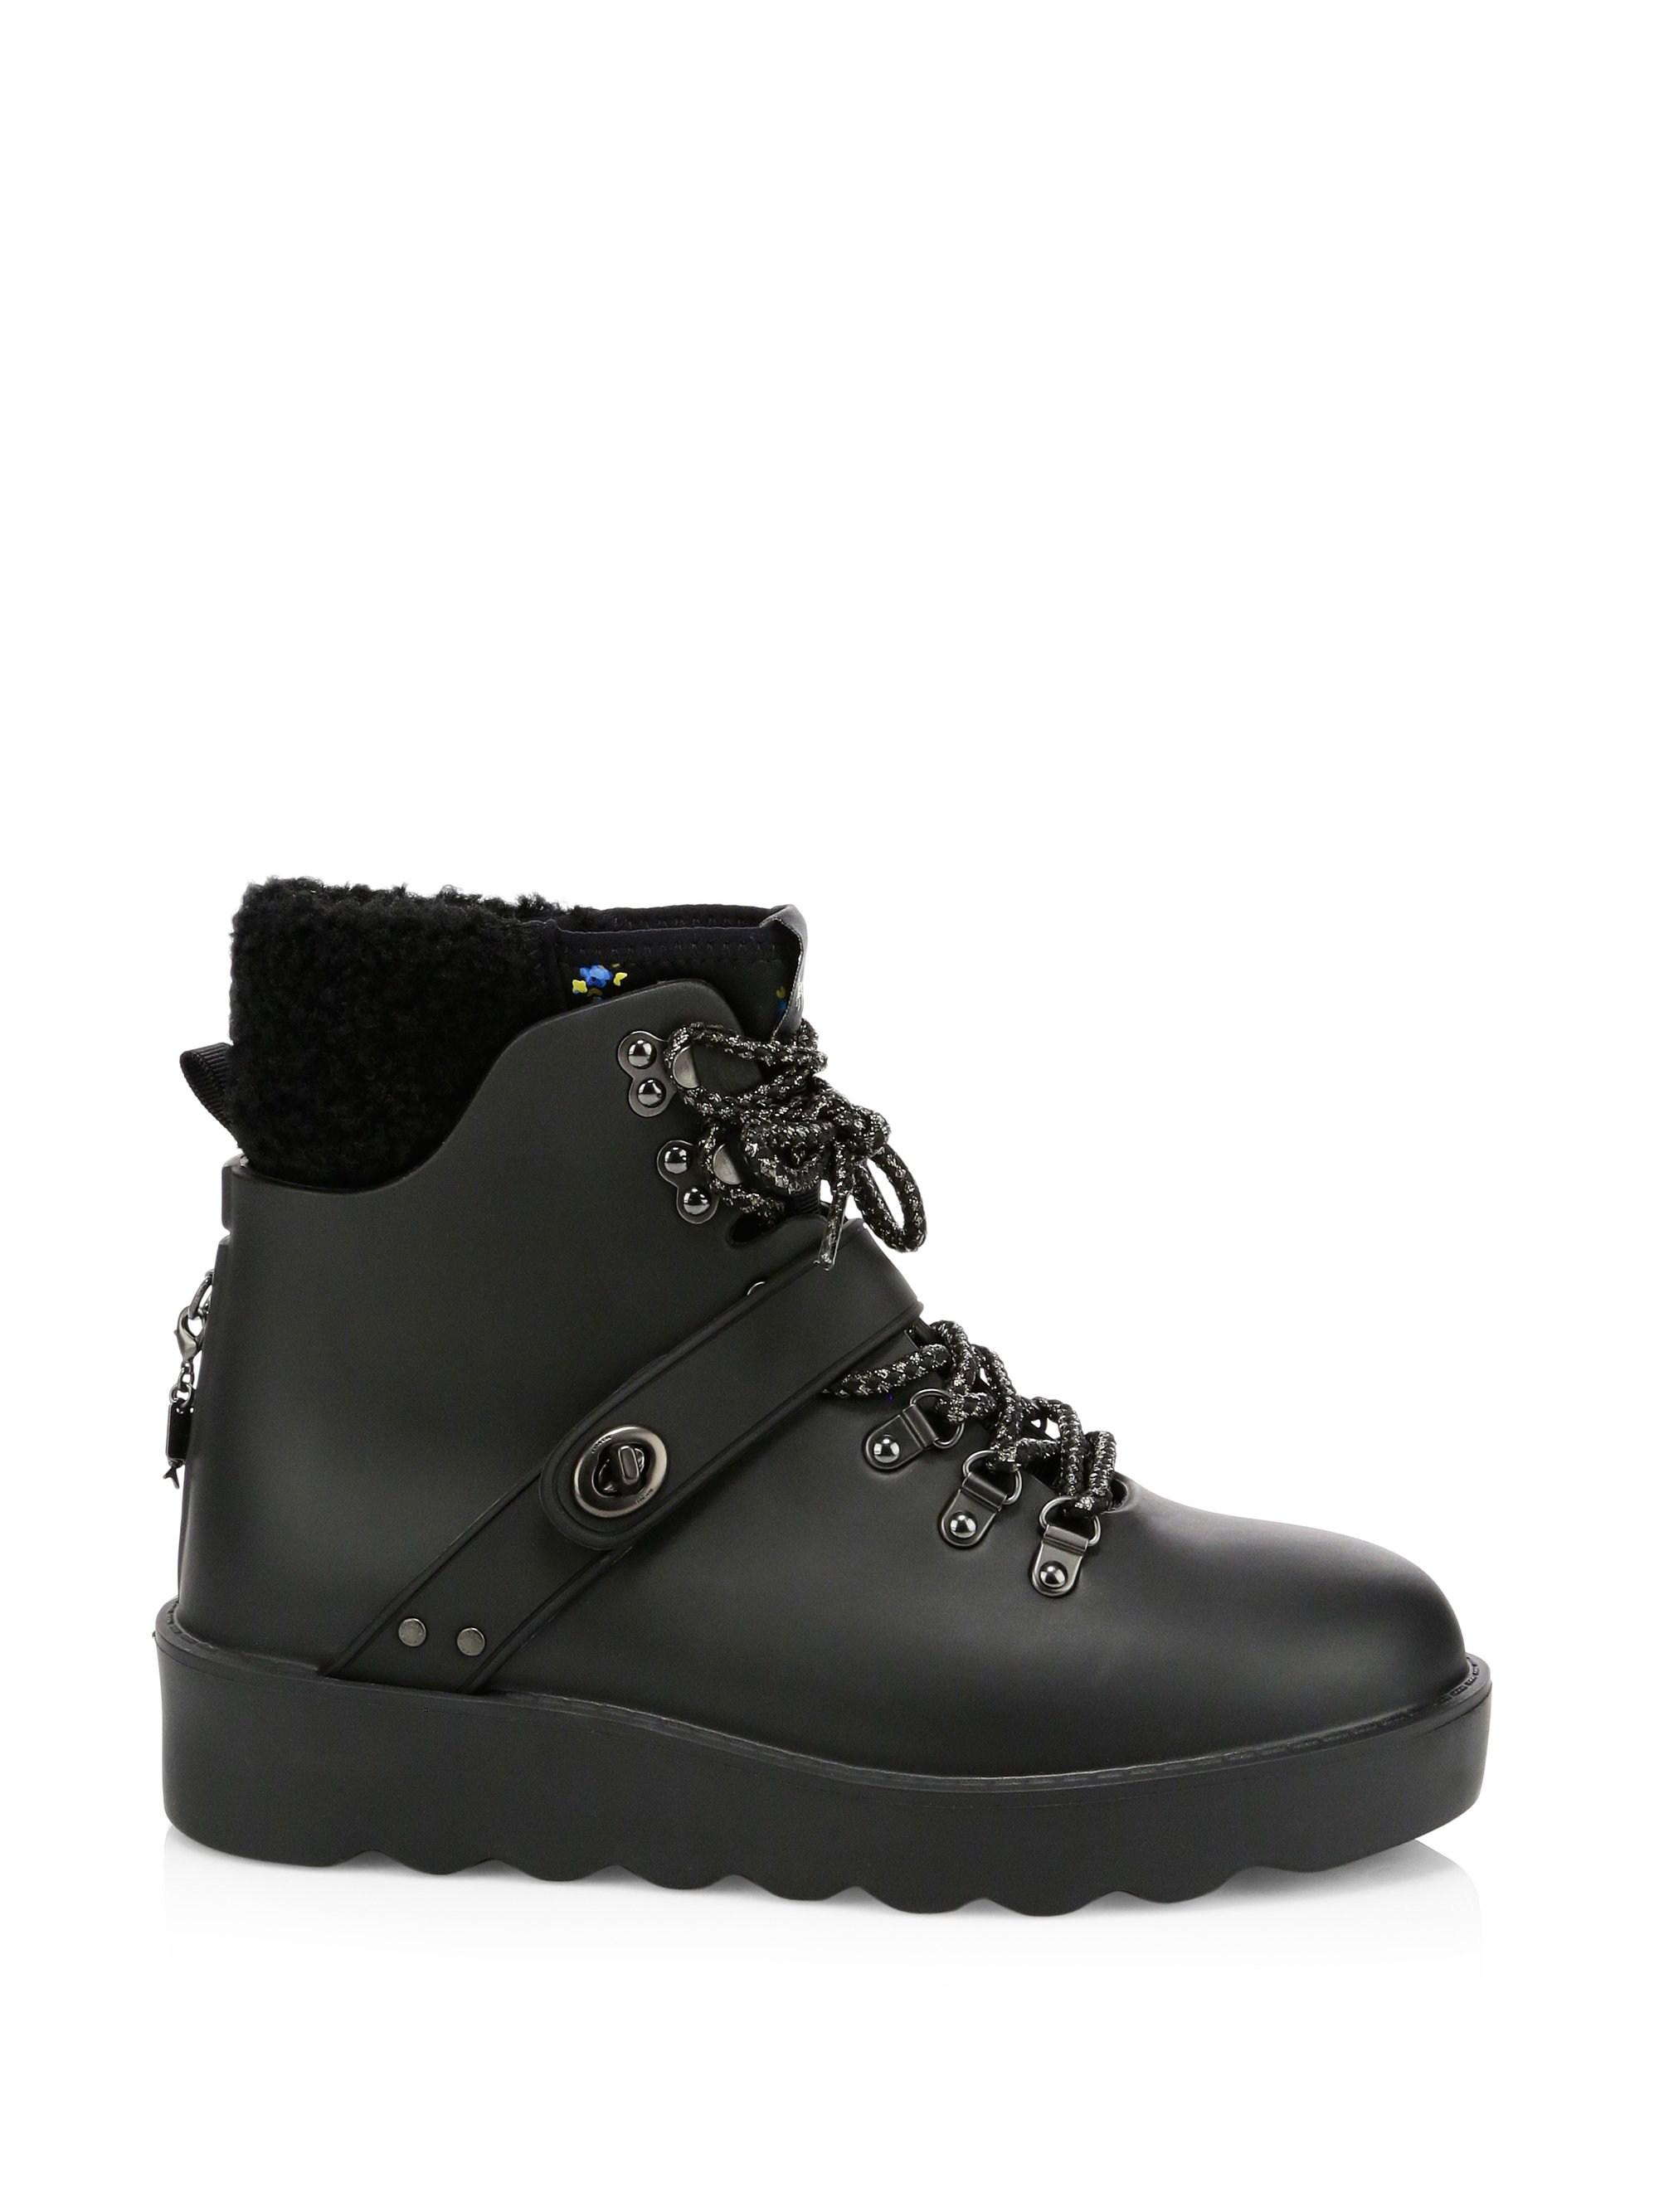 COACH 40mm Urban Hiker Rubber Boots in Black - Lyst